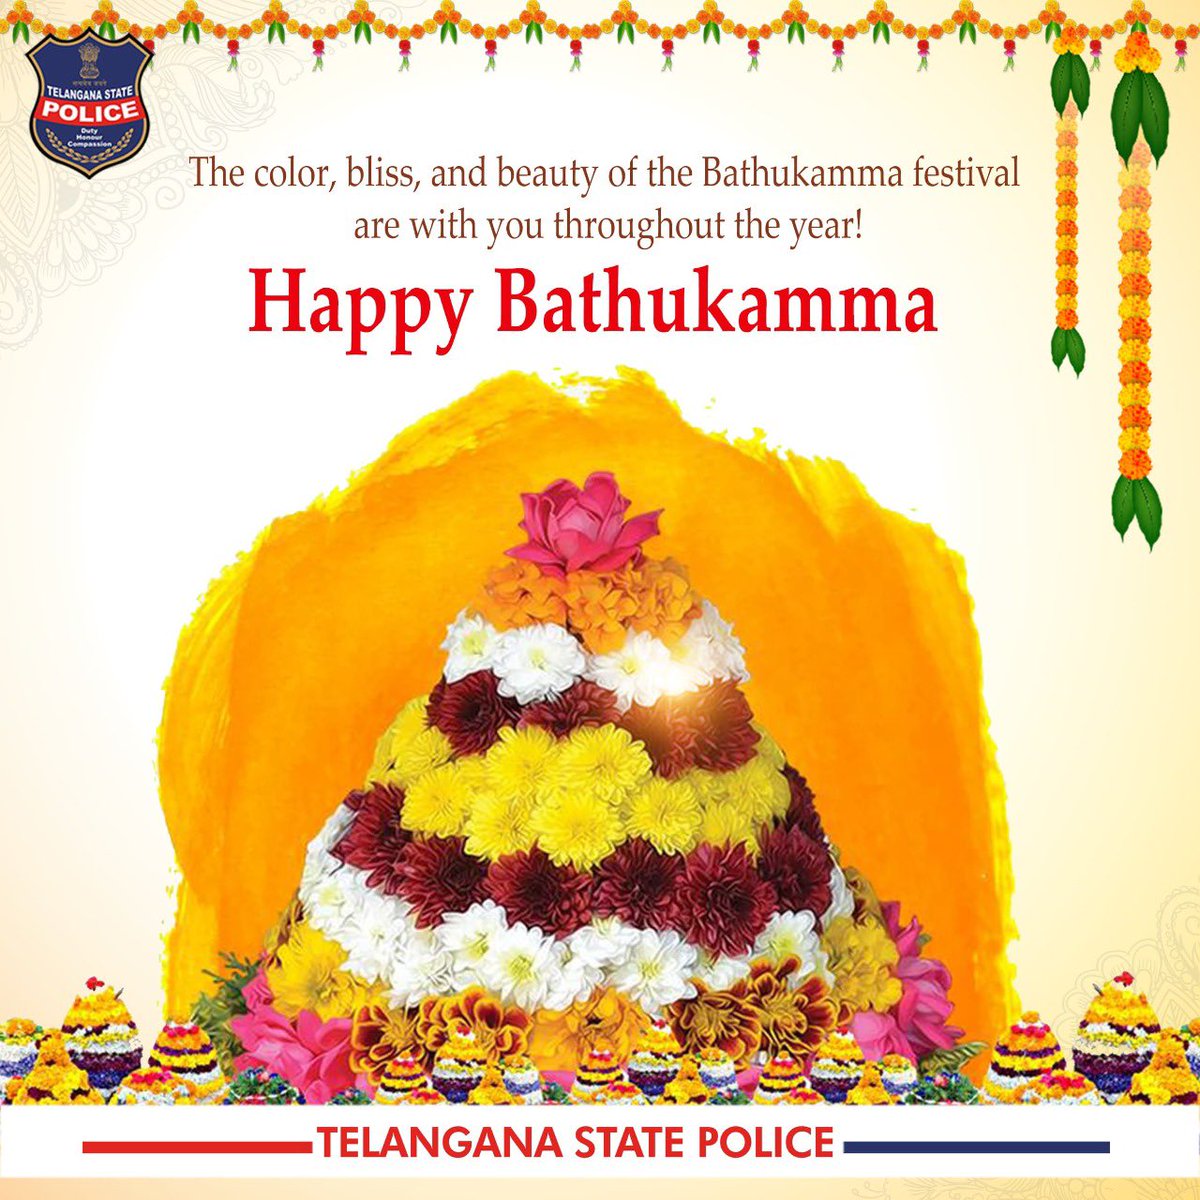 Wishing you all a happy #Bathukamma. May Telangana's rich culture and tradition be cherished. #TelanganaPolice